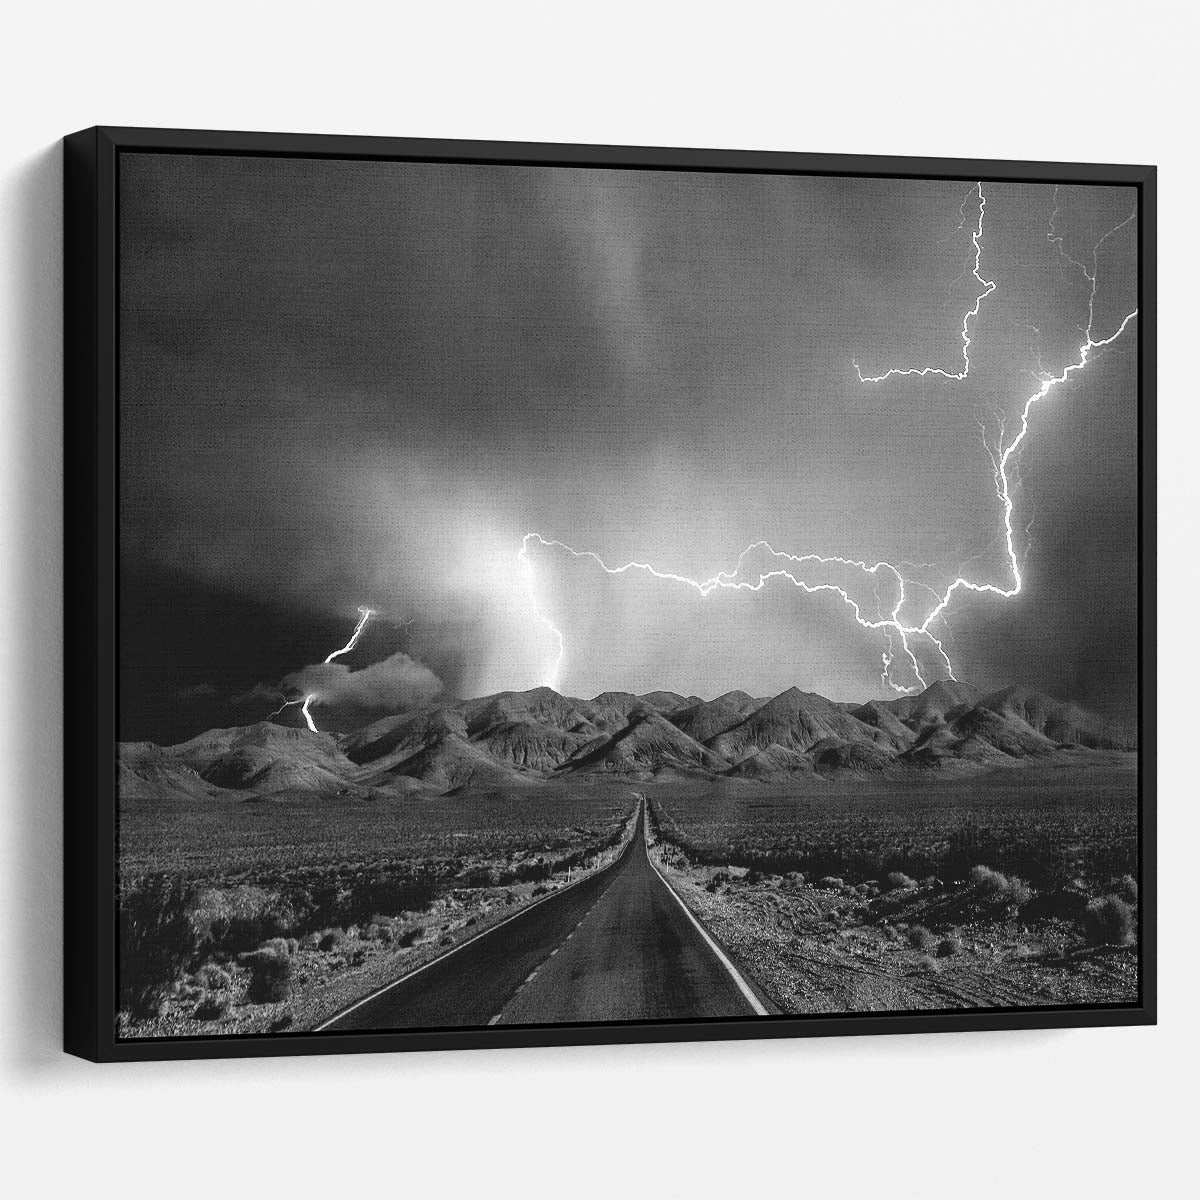 Dramatic Nevada Storm & Desert Landscape Wall Art by Luxuriance Designs. Made in USA.